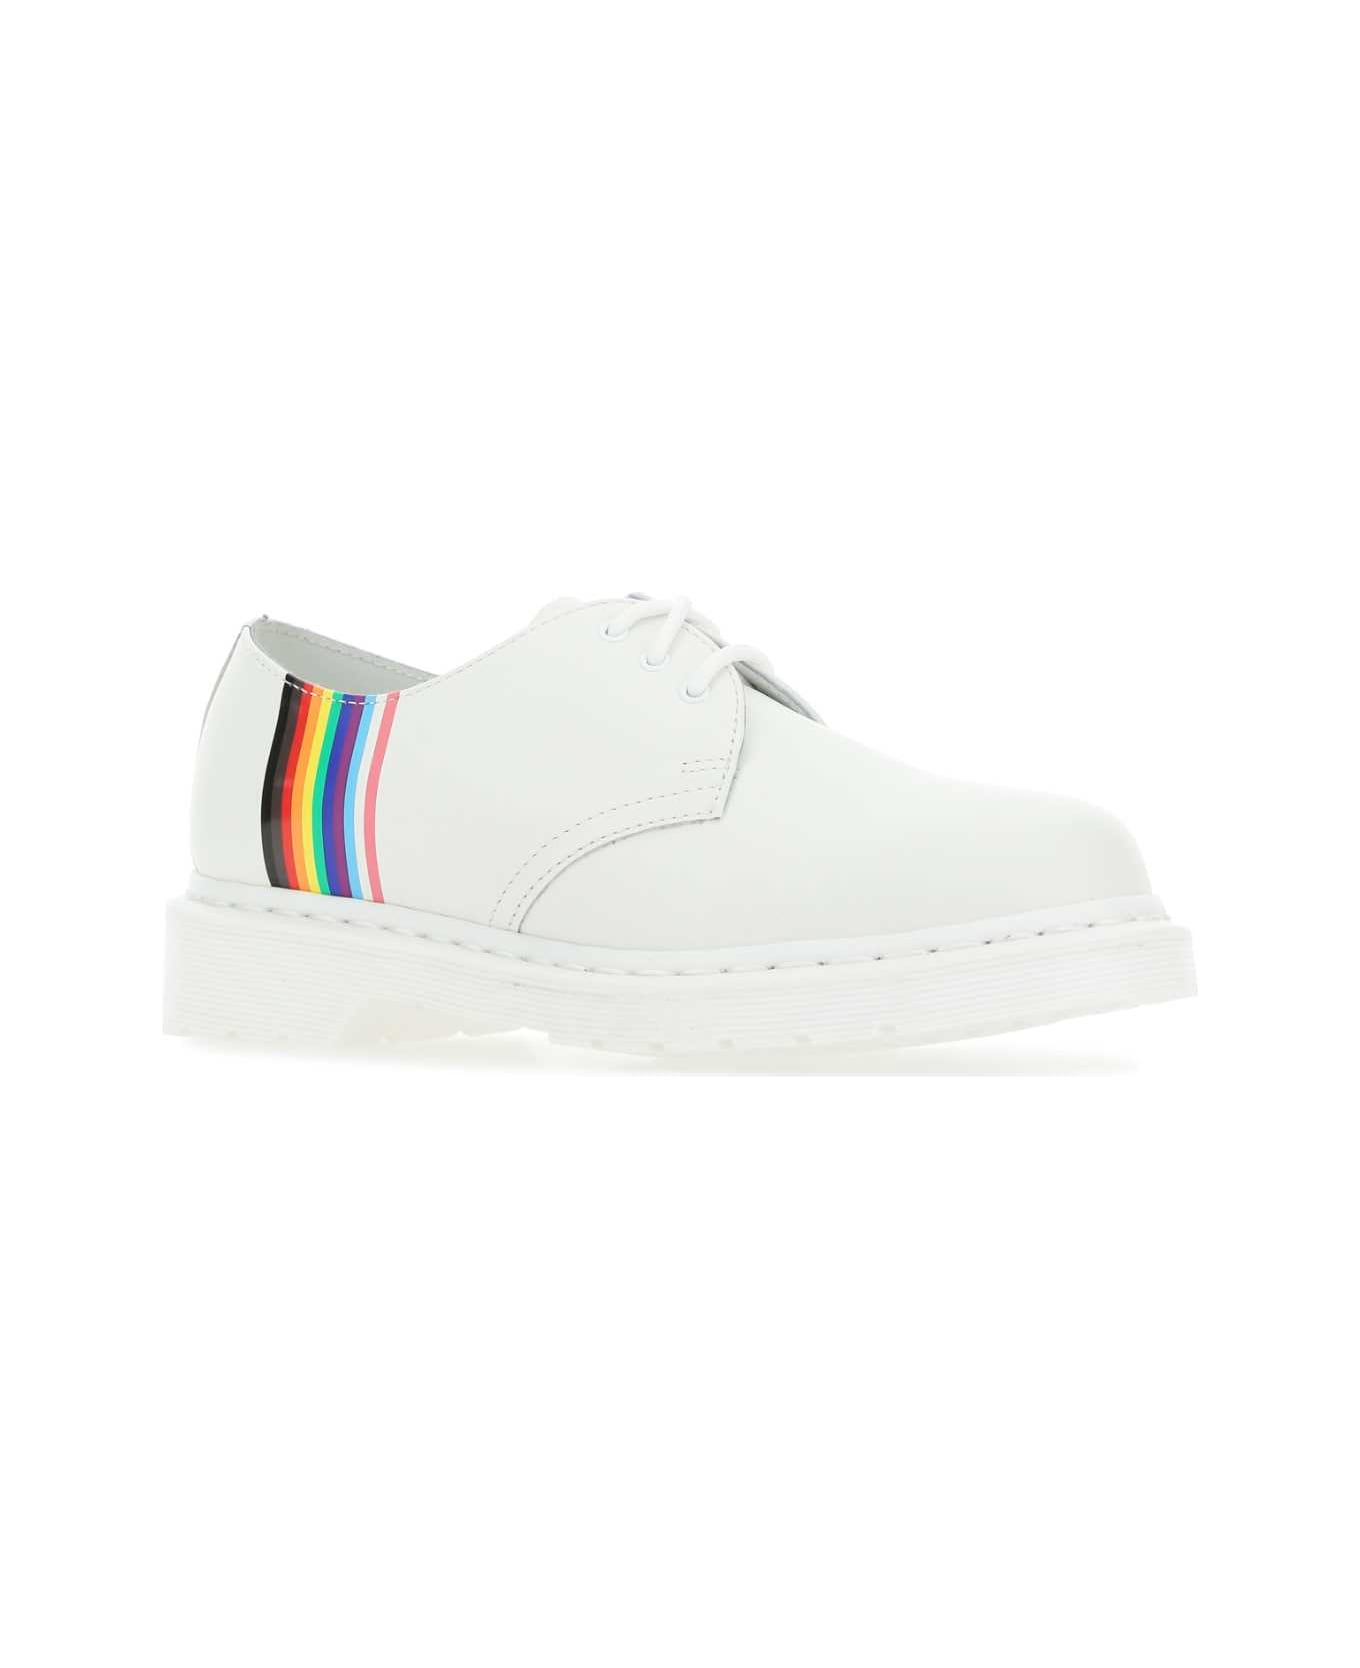 Dr. Martens White Leather 1461 For Pride Lace-up Shoes - WHITE レースアップシューズ